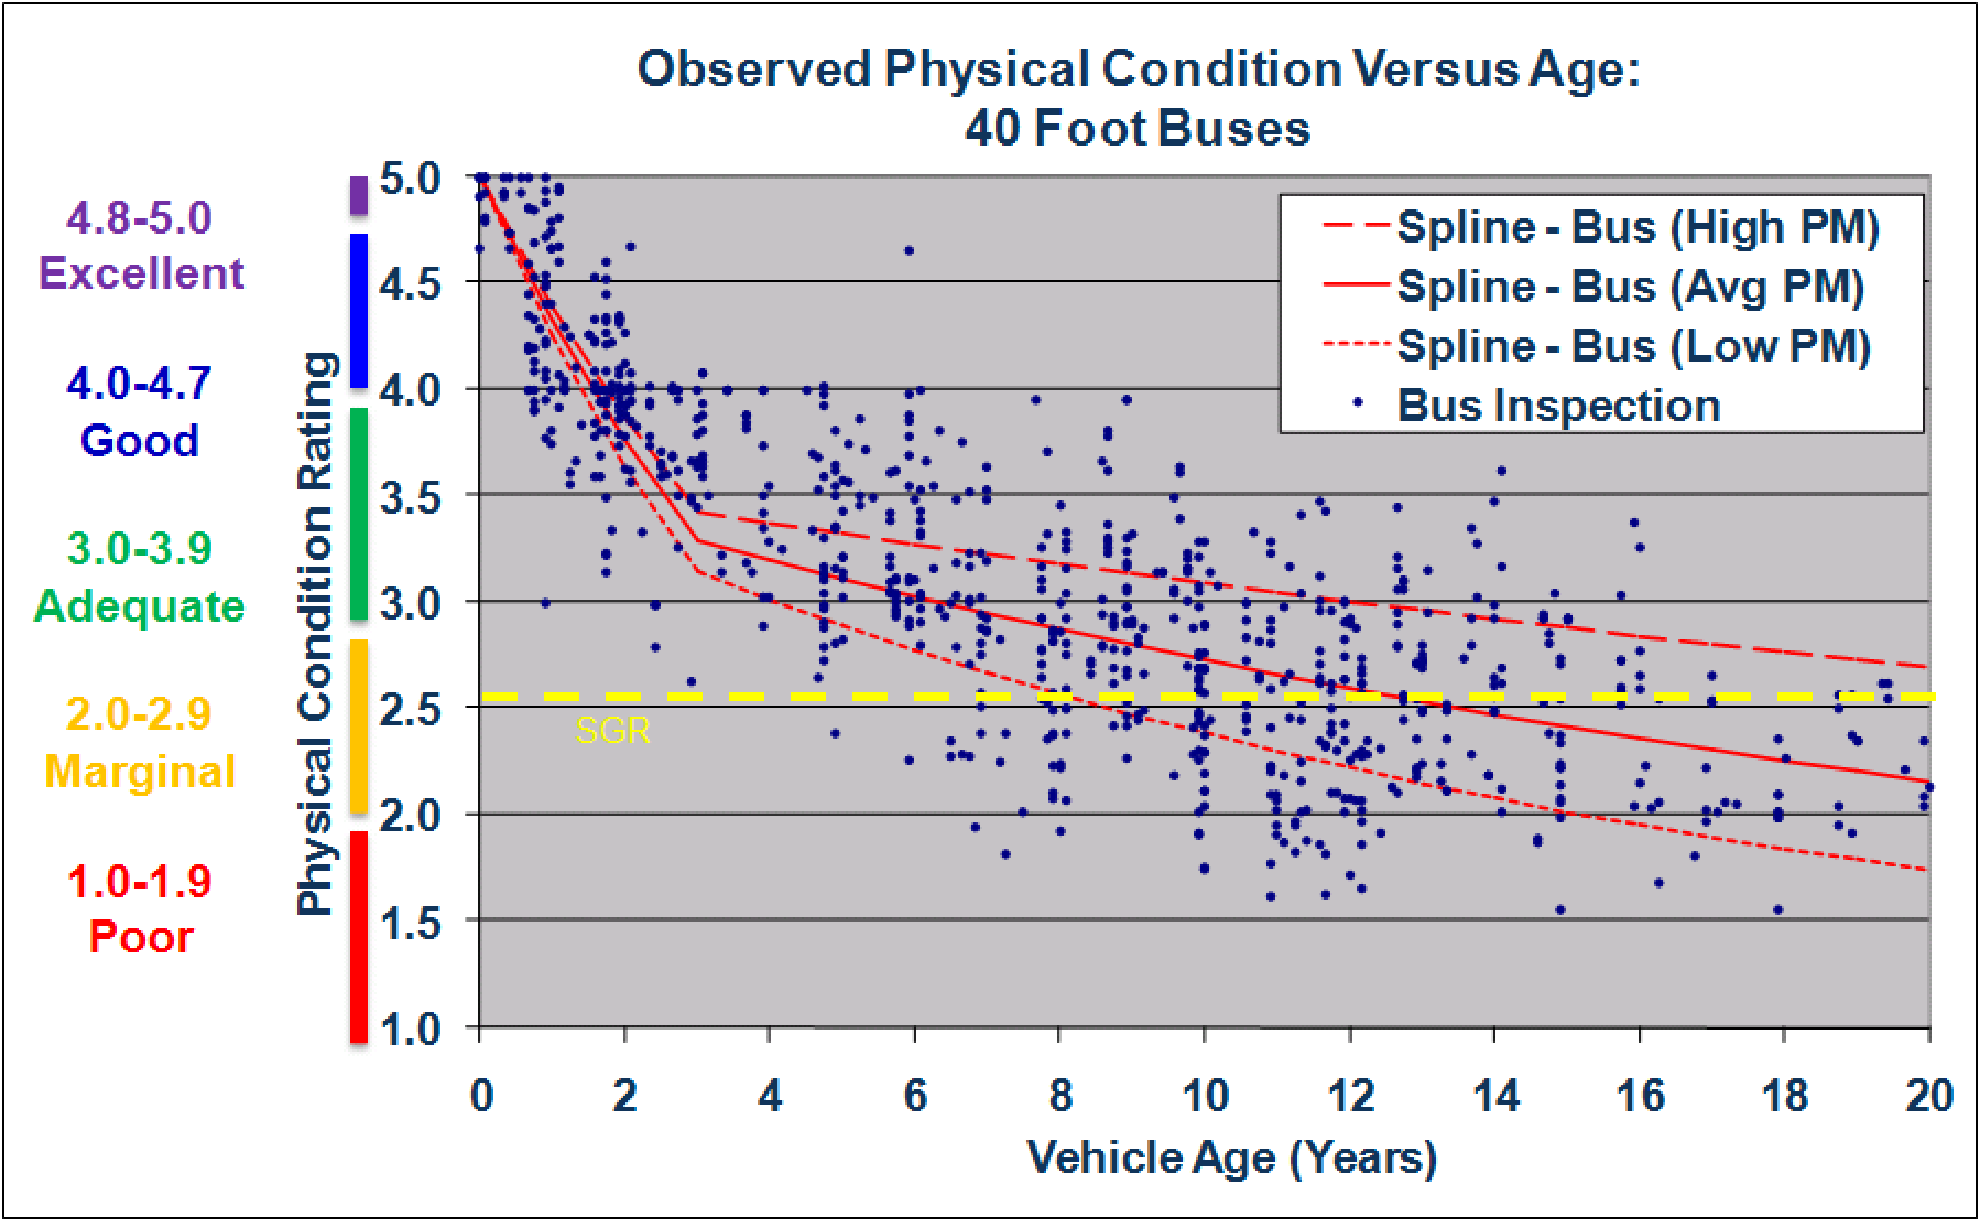 A scatter plot shows distribution of condition ratings over vehicle age from 0 to 20 years. The y-axis displays physical condition ratings from 1-5 (1-1.9 being poor, 2-2.9 being marginal, 3-3.9 being adequate, 4-4.7 being good, and 4.8-5 being excellent). The SGR threshold is 2.5. There are small blue dots throughout the graph with a negative slope that pertains to the data gathered from bus inspections. The red trend lines associate the data obtained and the amount of preventative maintenance (high, average, or low). Pertaining to high preventative maintenance, the trend begins at 5 and decreases sharply to just below 3.5 after 3 years. The trend continues to decrease slightly, hitting a rating of 3 around 11.5 years and ending around a 2.6 after 20 years. This trend line never crosses the SGR threshold. Pertaining to average preventative maintenance, the rating begins at 5 and sharply slopes downward to around 3.4 after 3 years. The trend continues to decrease to a rating of 3 after 6 years, a rating of 2.5 after 13 years, and ending at a rating of about 2.1 after 20 years. When looking at low preventative maintenance, the trend begins at a rating of 5 and sharply decreases to around 3.1 after 3 years. The trend continues downward slightly to a rating of 2.5 after 8 years, a rating of 2 after 15 years, and ends at a rating of around 1.7 after 20 years. Source: FTA; empirical condition data obtained from a broad sample of U.S. transit operators.